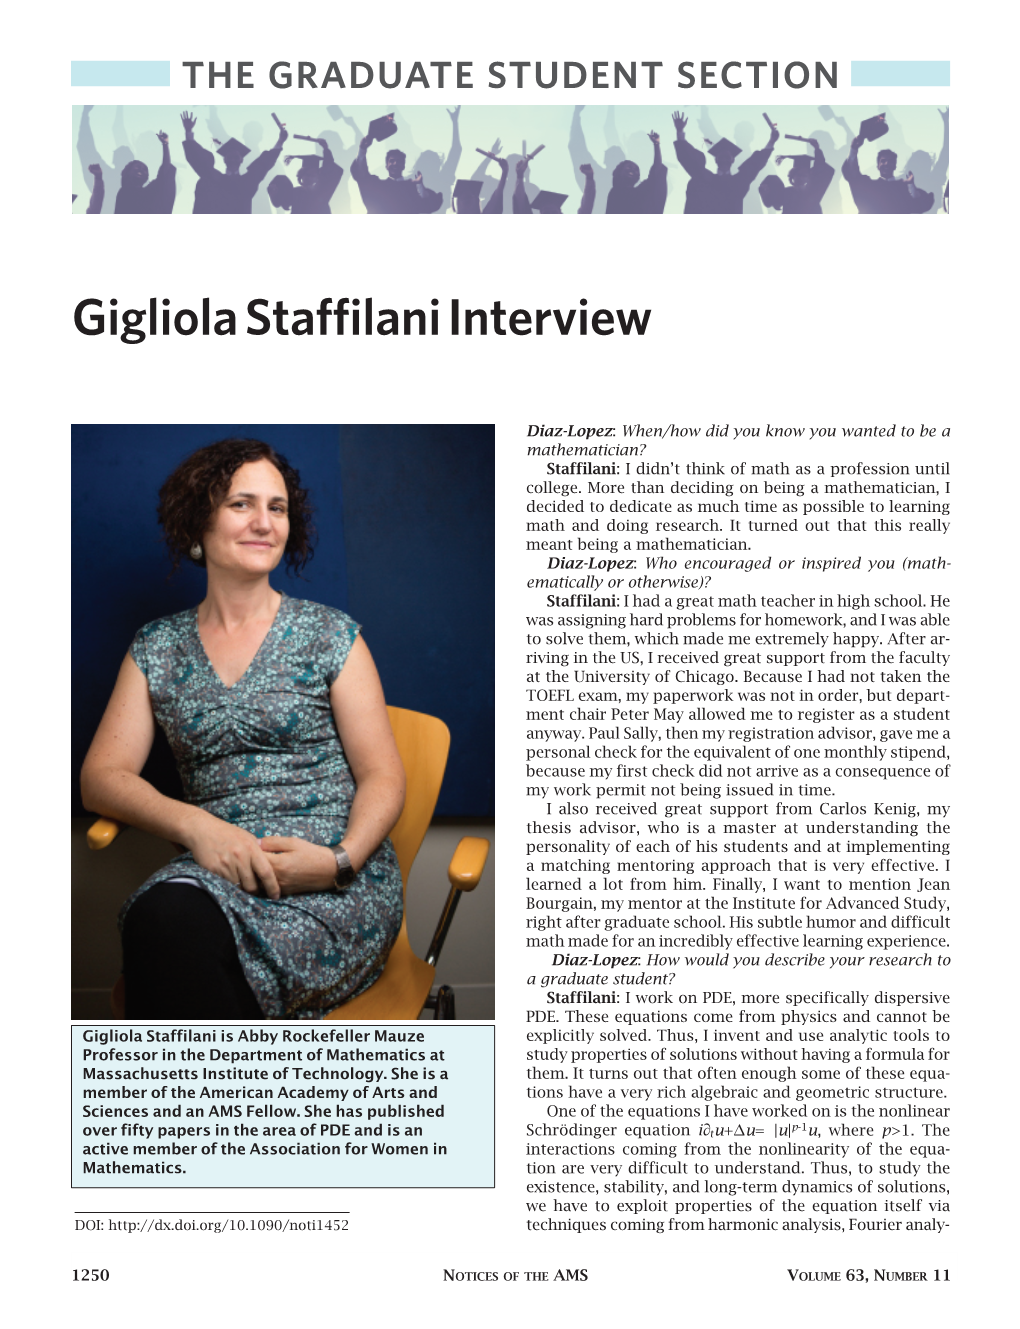 Interview with Gigliola Staffilani